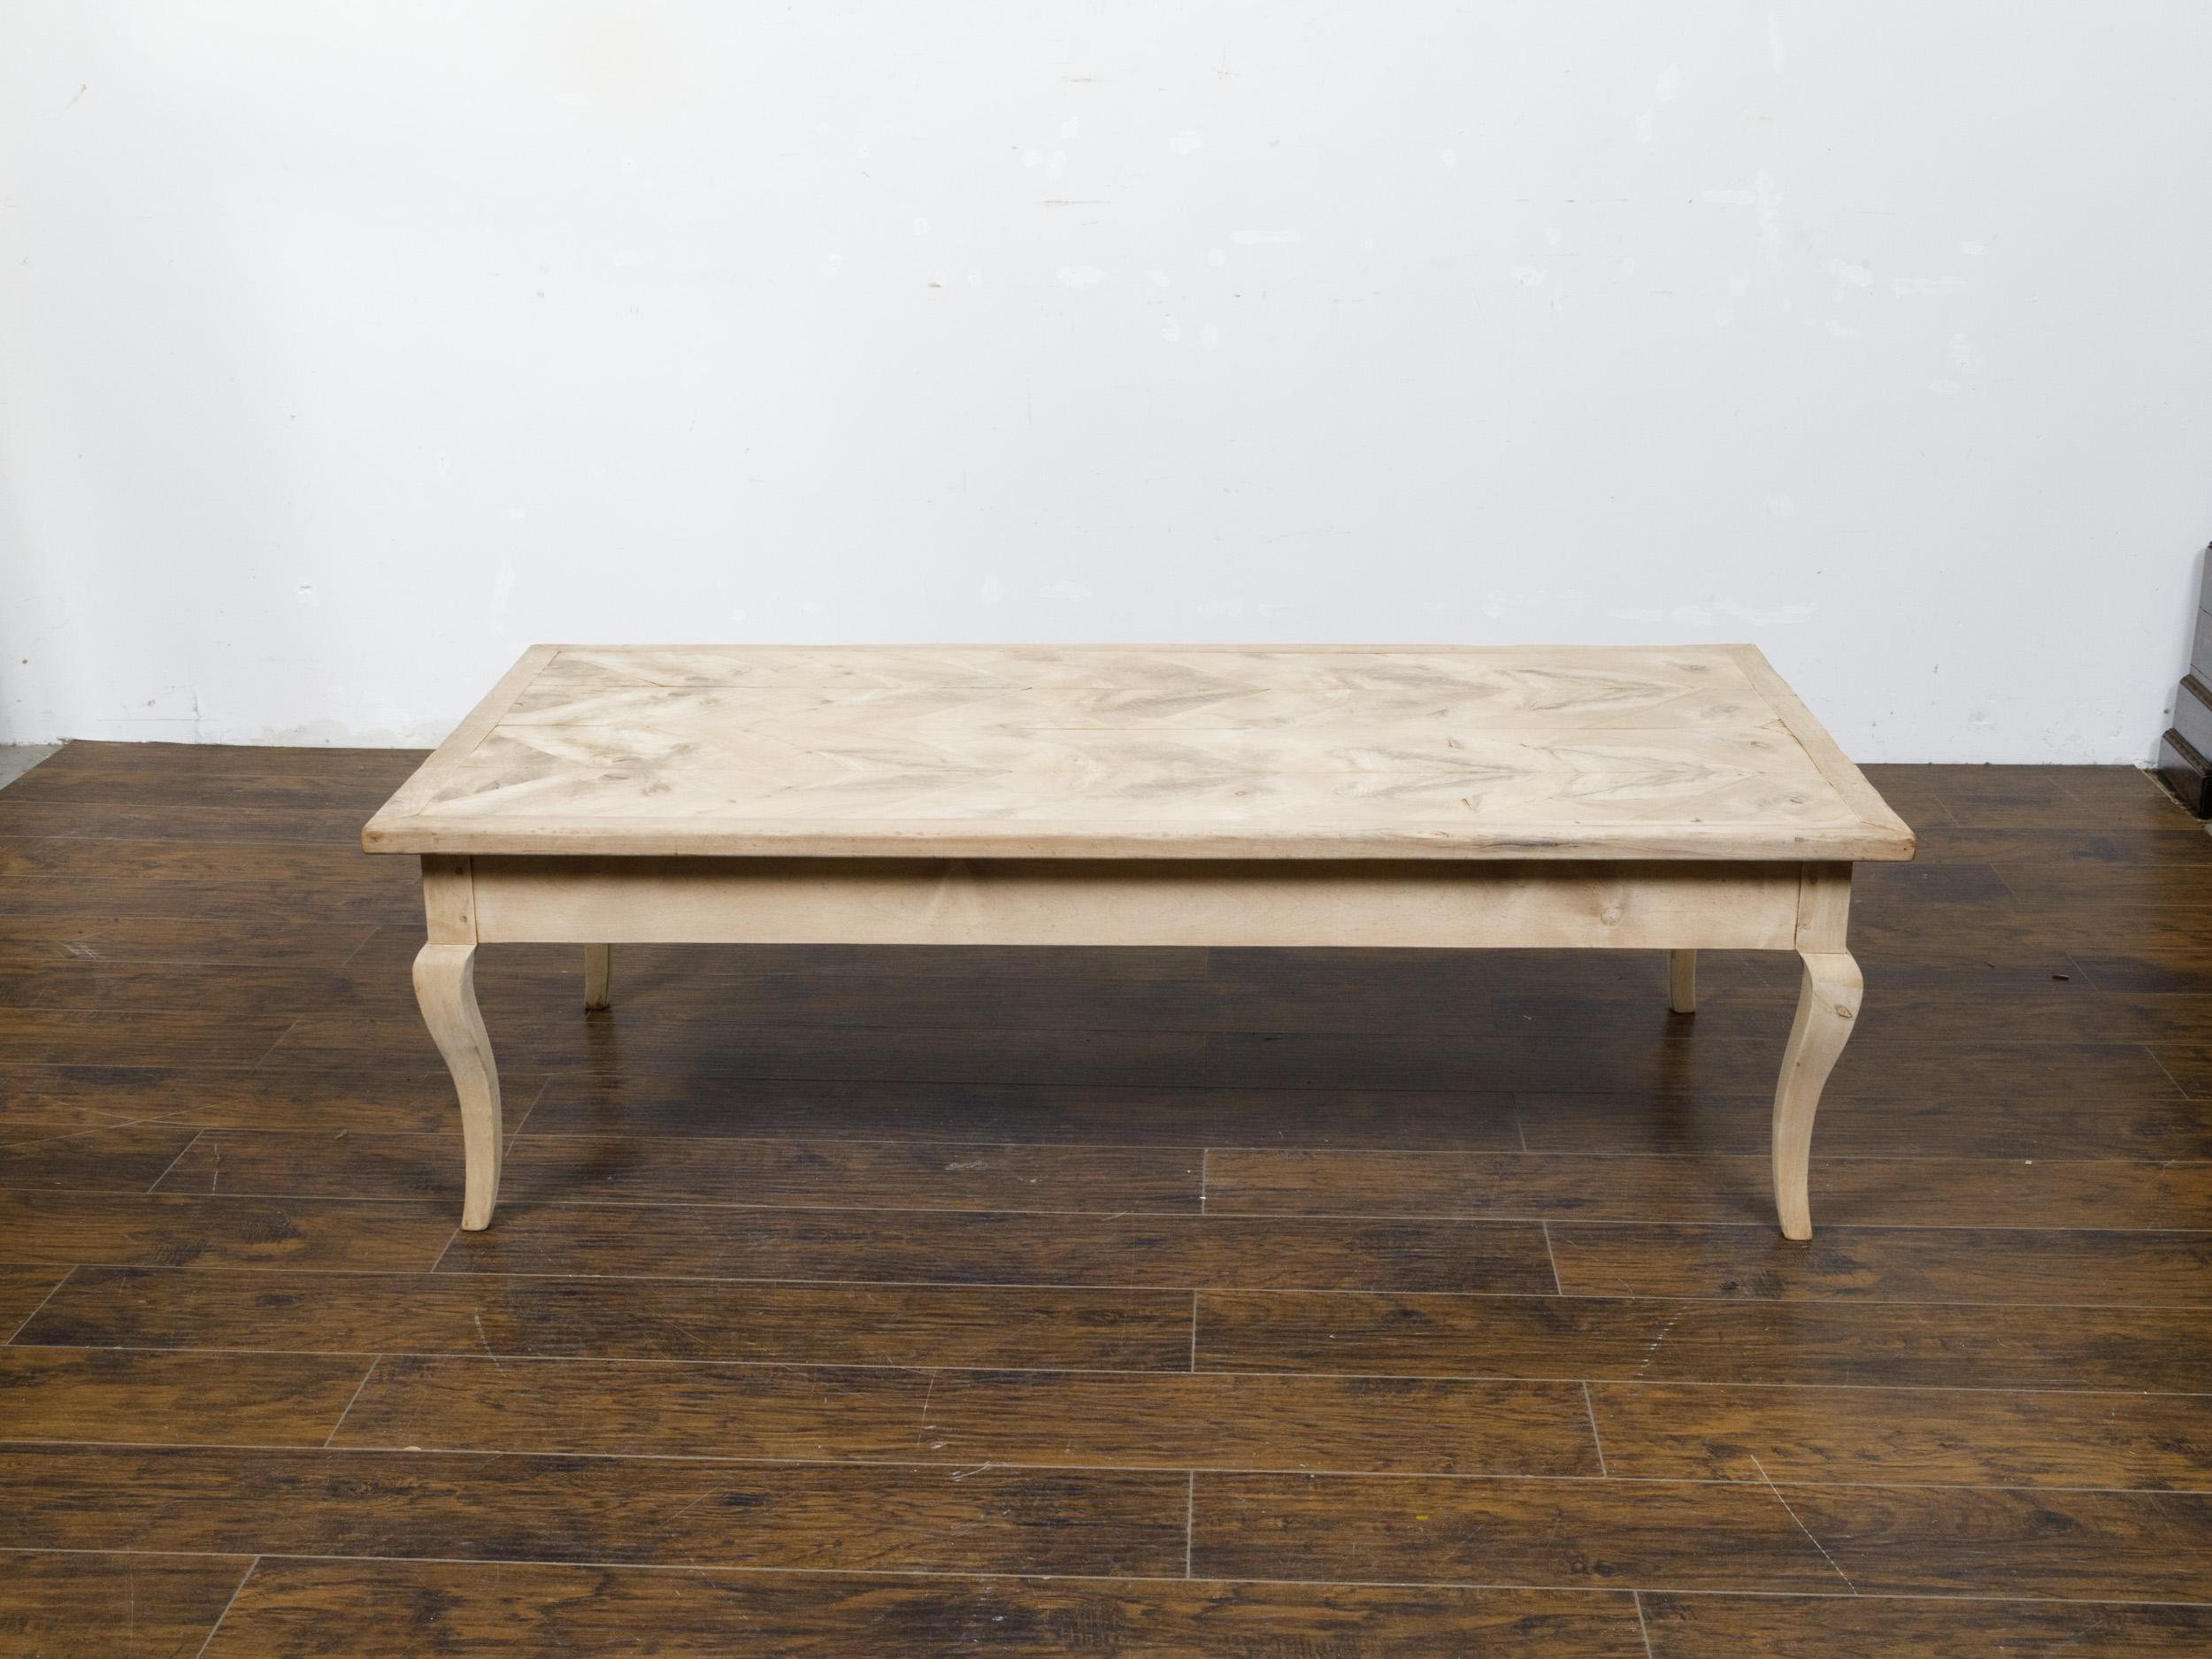 A French Louis XV style bleached fruitwood coffee table from the 19th century with butterfly veneer and carved cabriole legs. This elegant French Louis XV style coffee table, crafted in the 19th century from fruitwood, beautifully exemplifies the